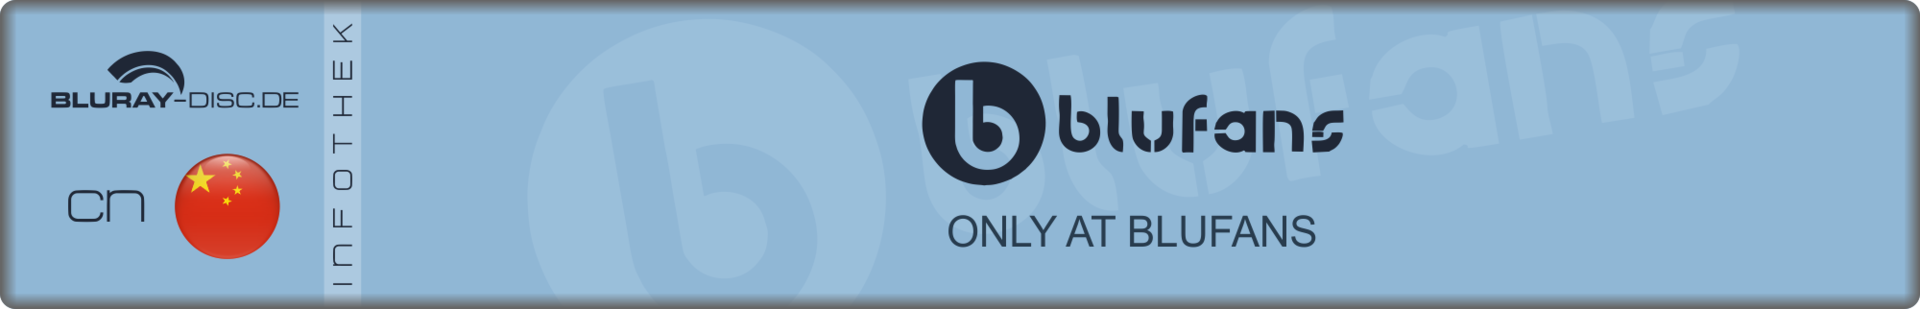 CN_Blufans_Only_at_Blufans_update_Logo.png